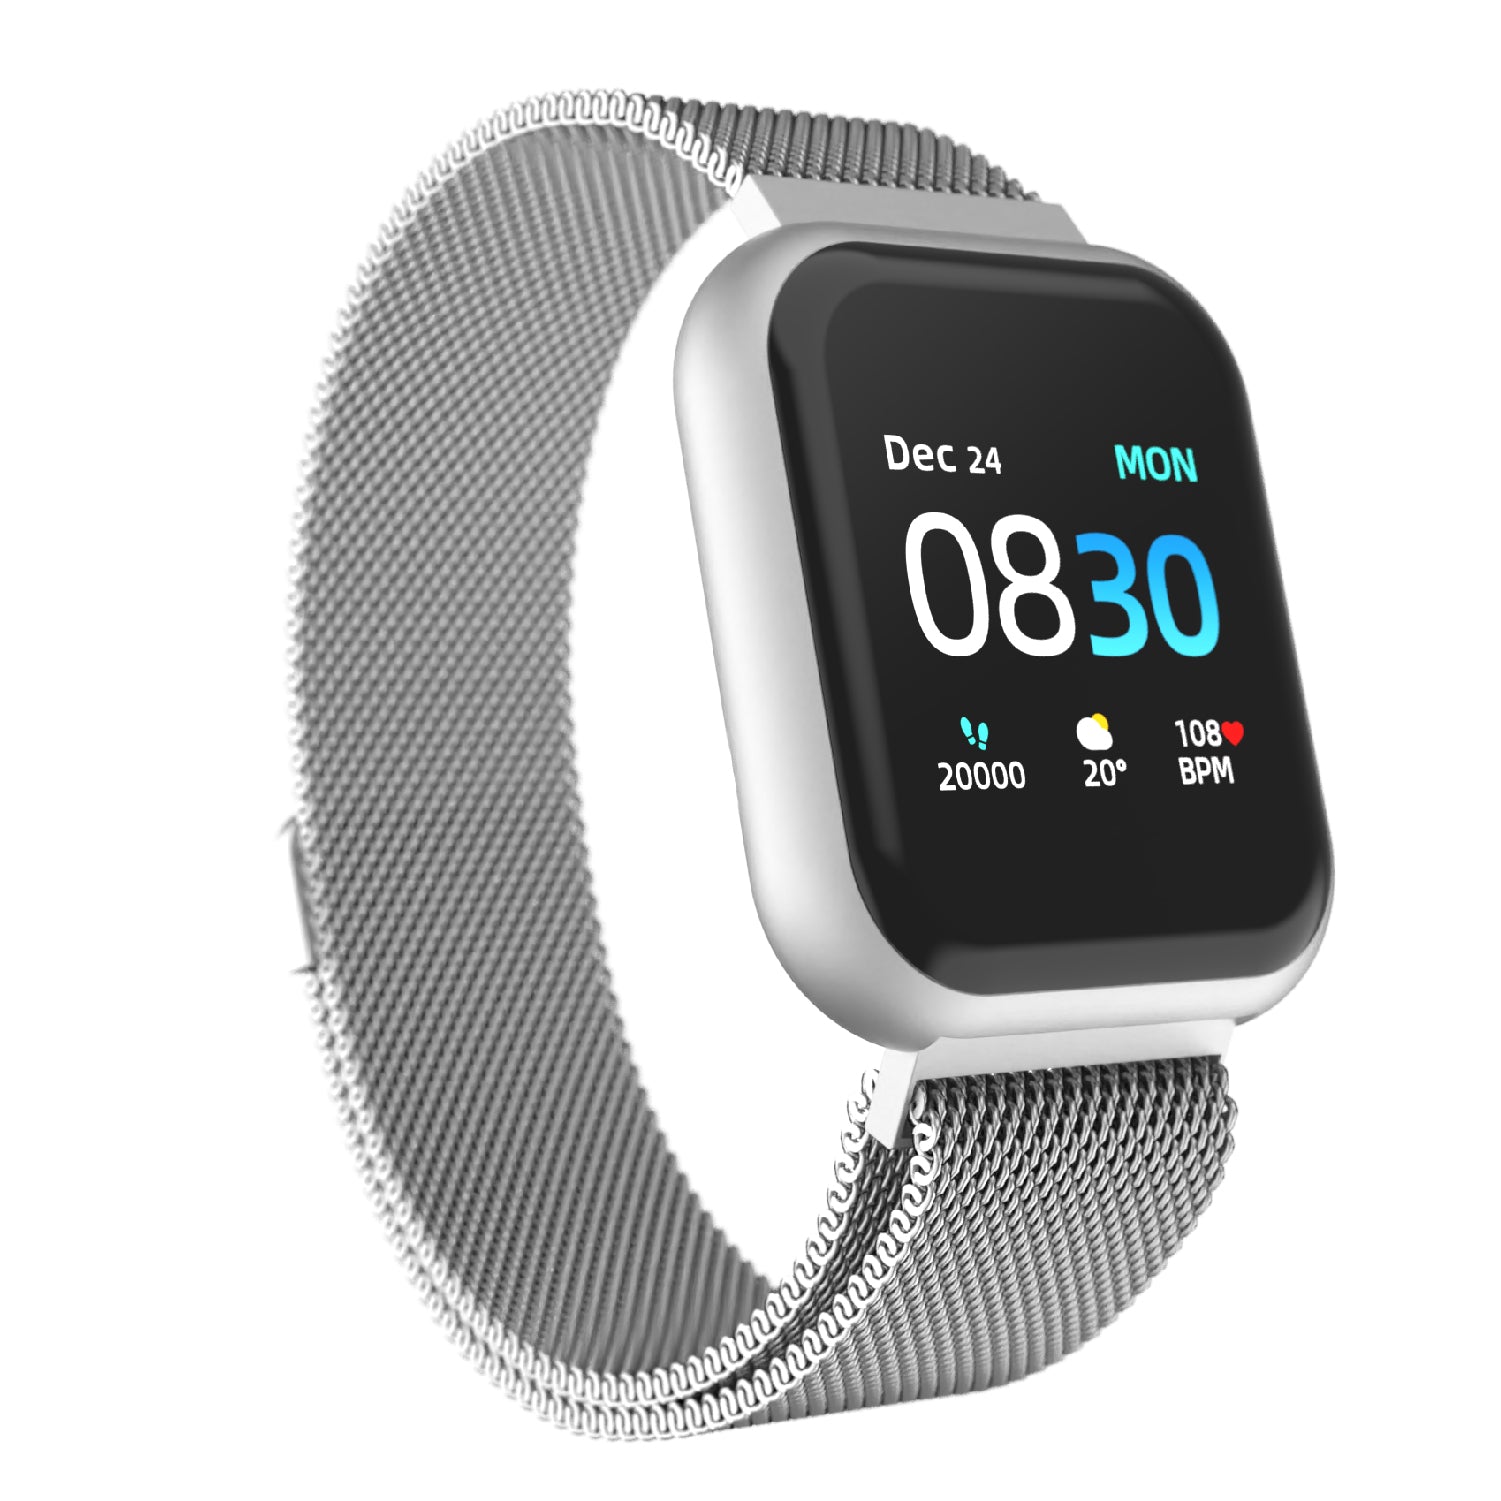 iTouch Air 3 Smartwatch in Silver with Silver Strap